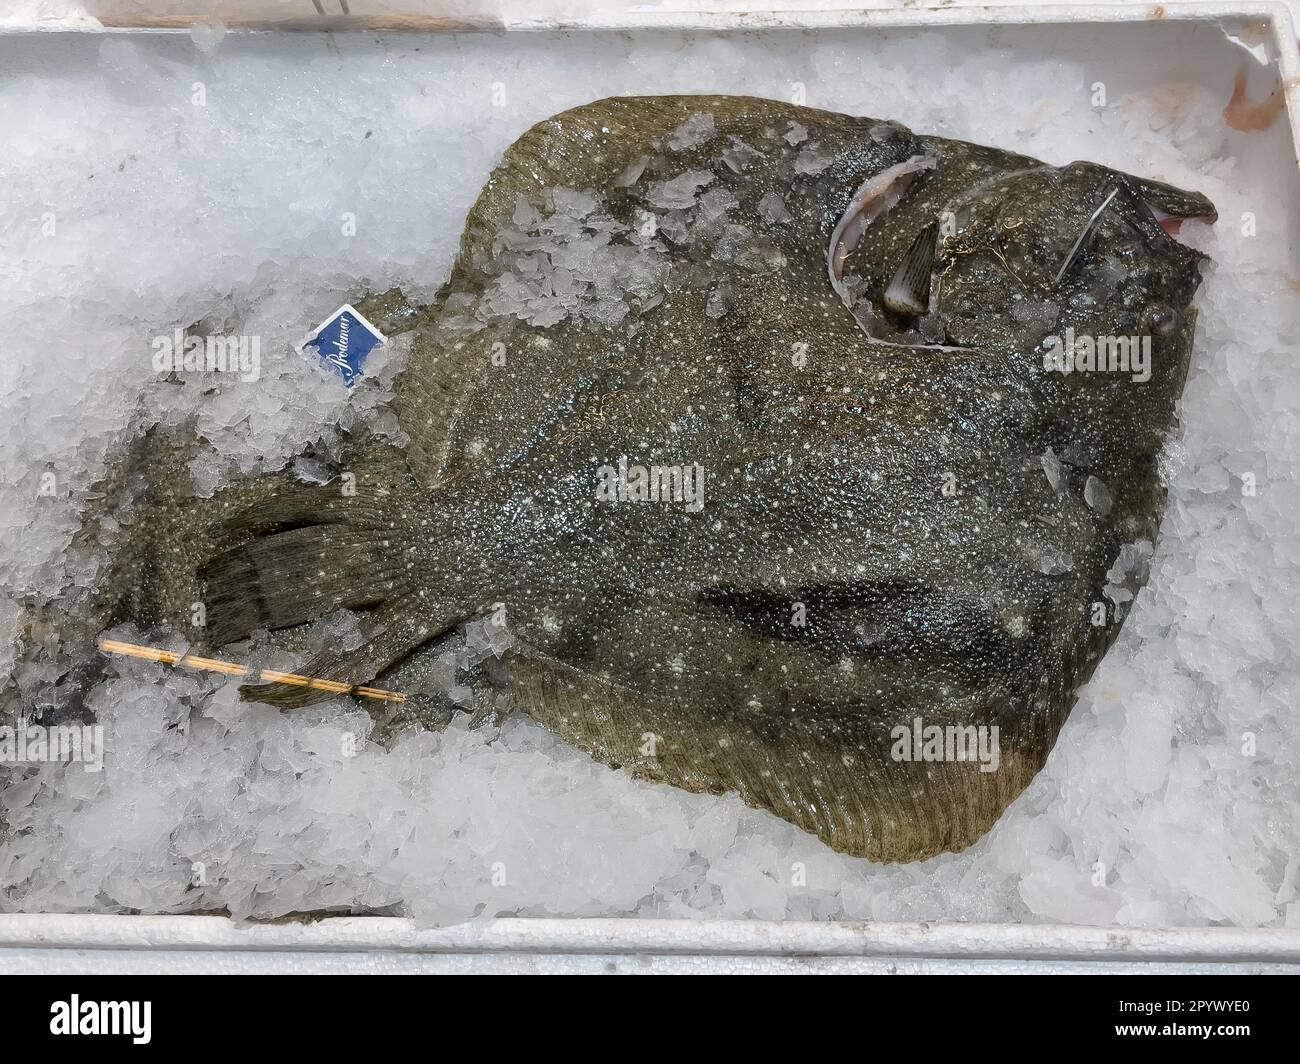 Display of fishery caught fish fresh fish turbot (Psetta maxima) on ice in refrigerated counter fish counter of fishmonger fish sale, food trade Stock Photo